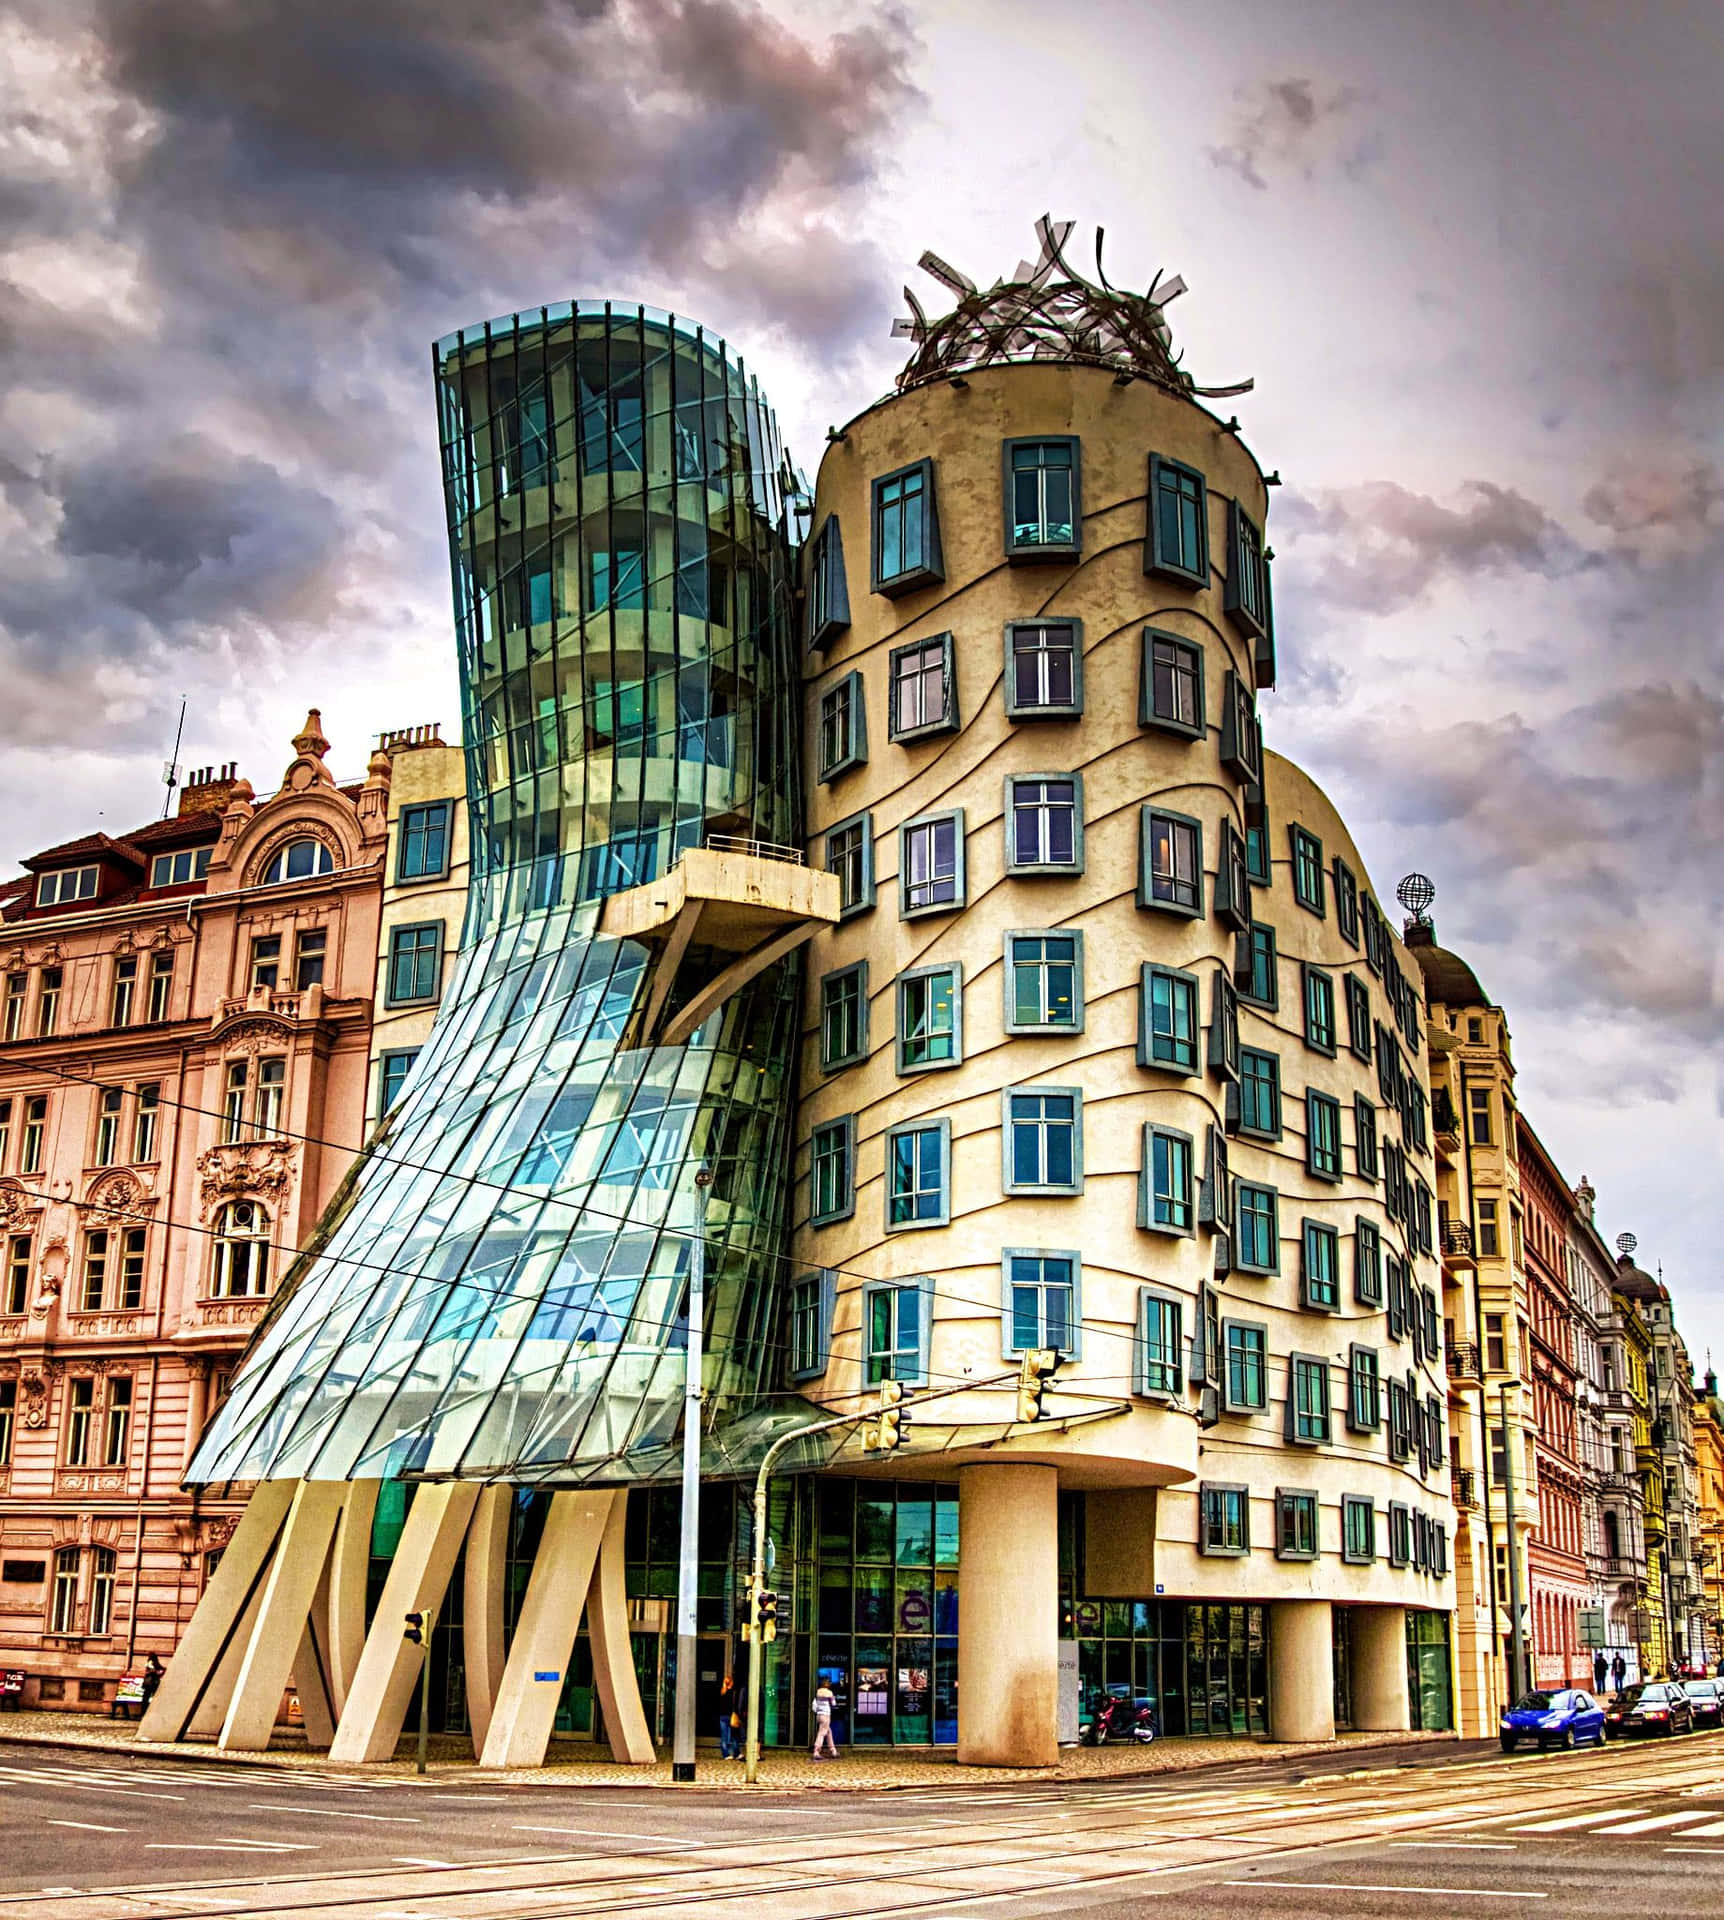 Spectacular HDR Image of the Dancing House Wallpaper